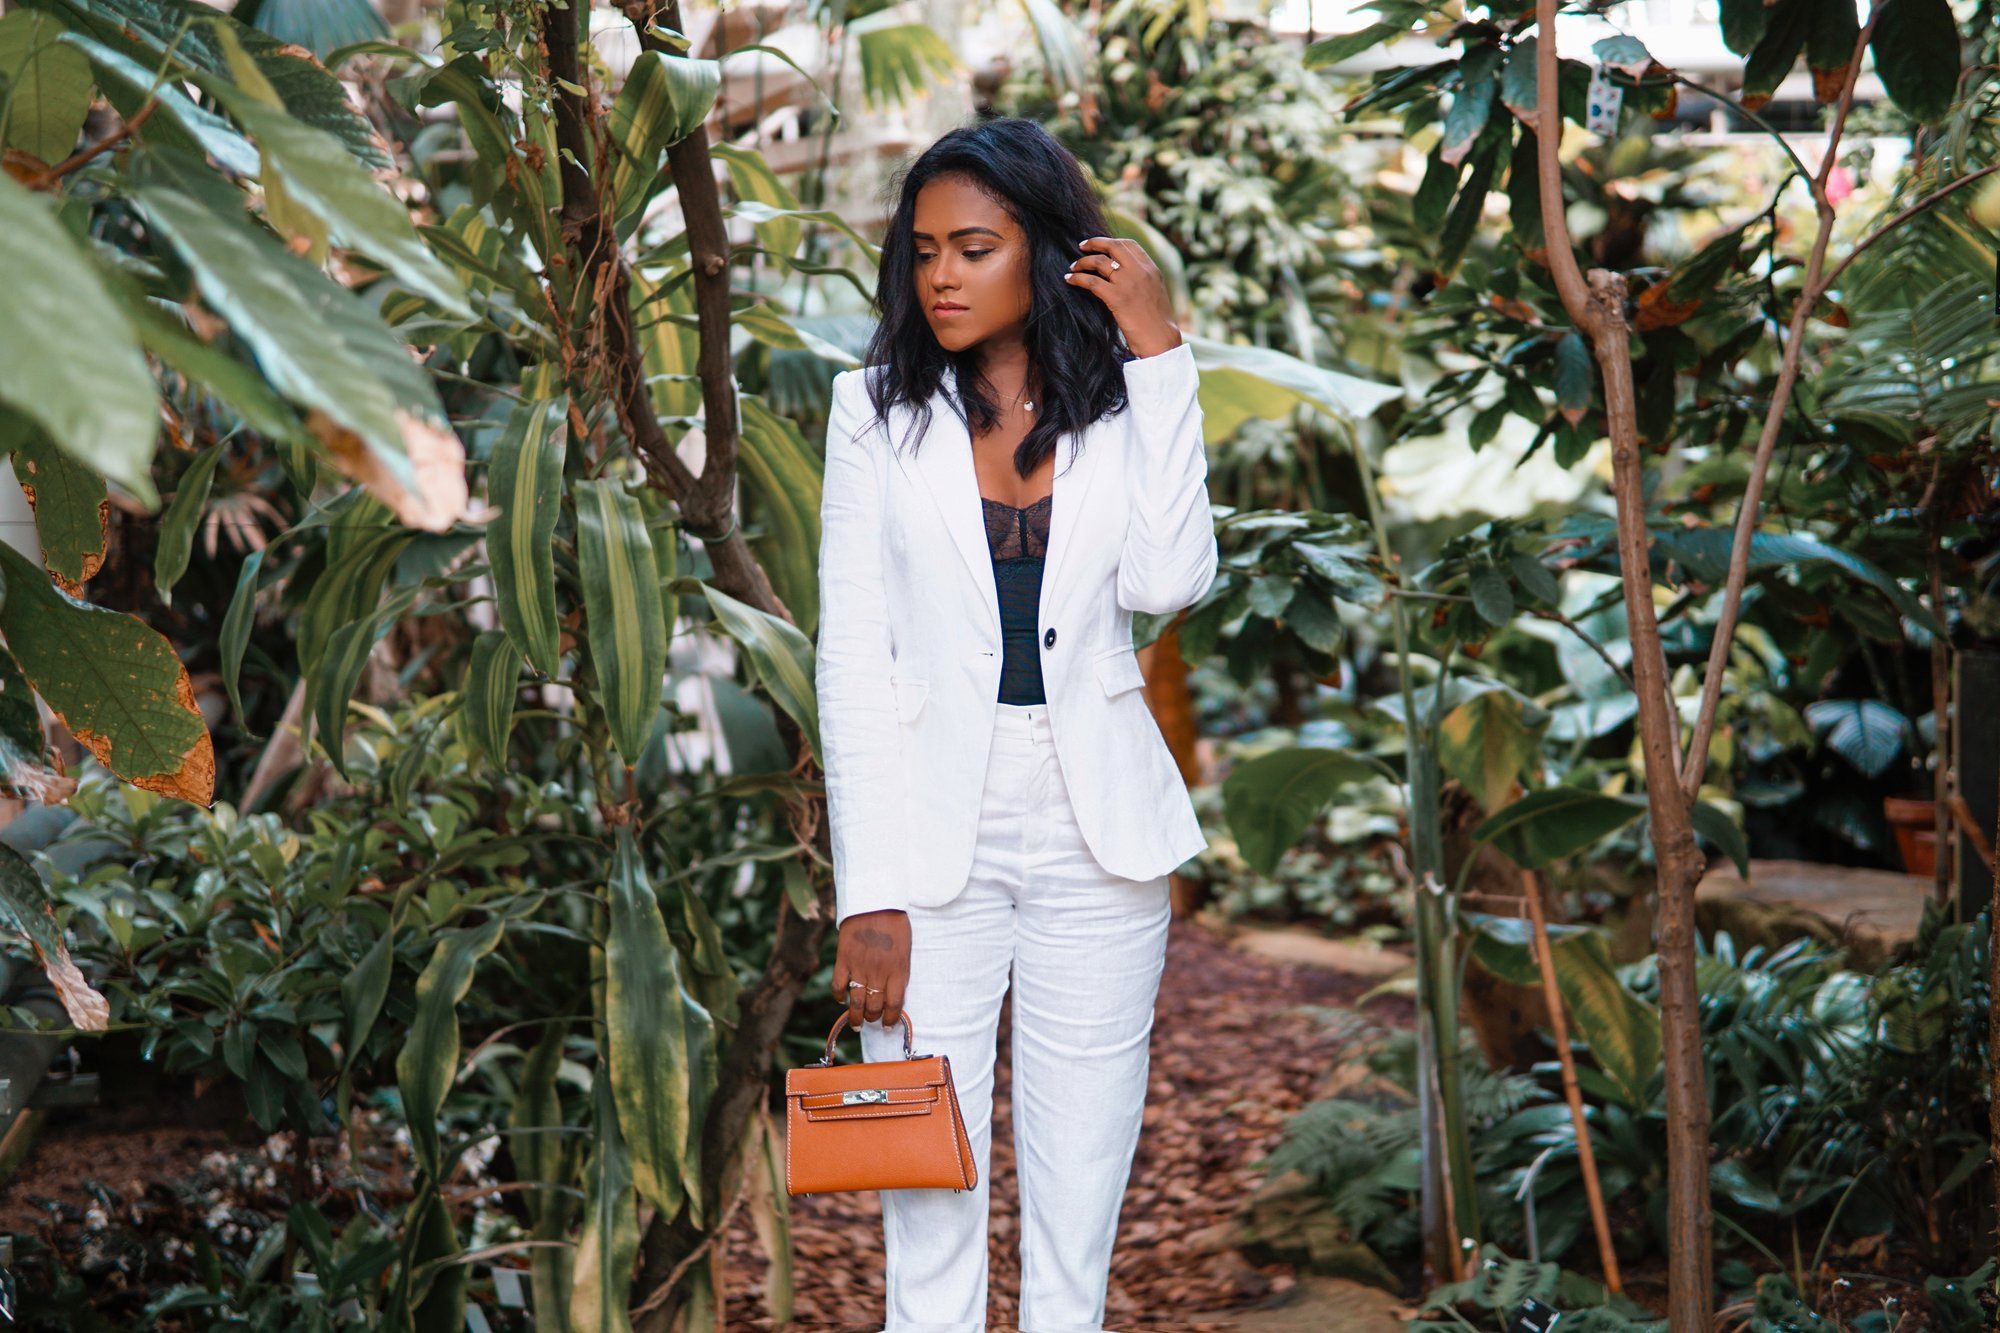 Sachini standing between exotic trees wearing a white suit holding a brown Hermès mini Kelly bag